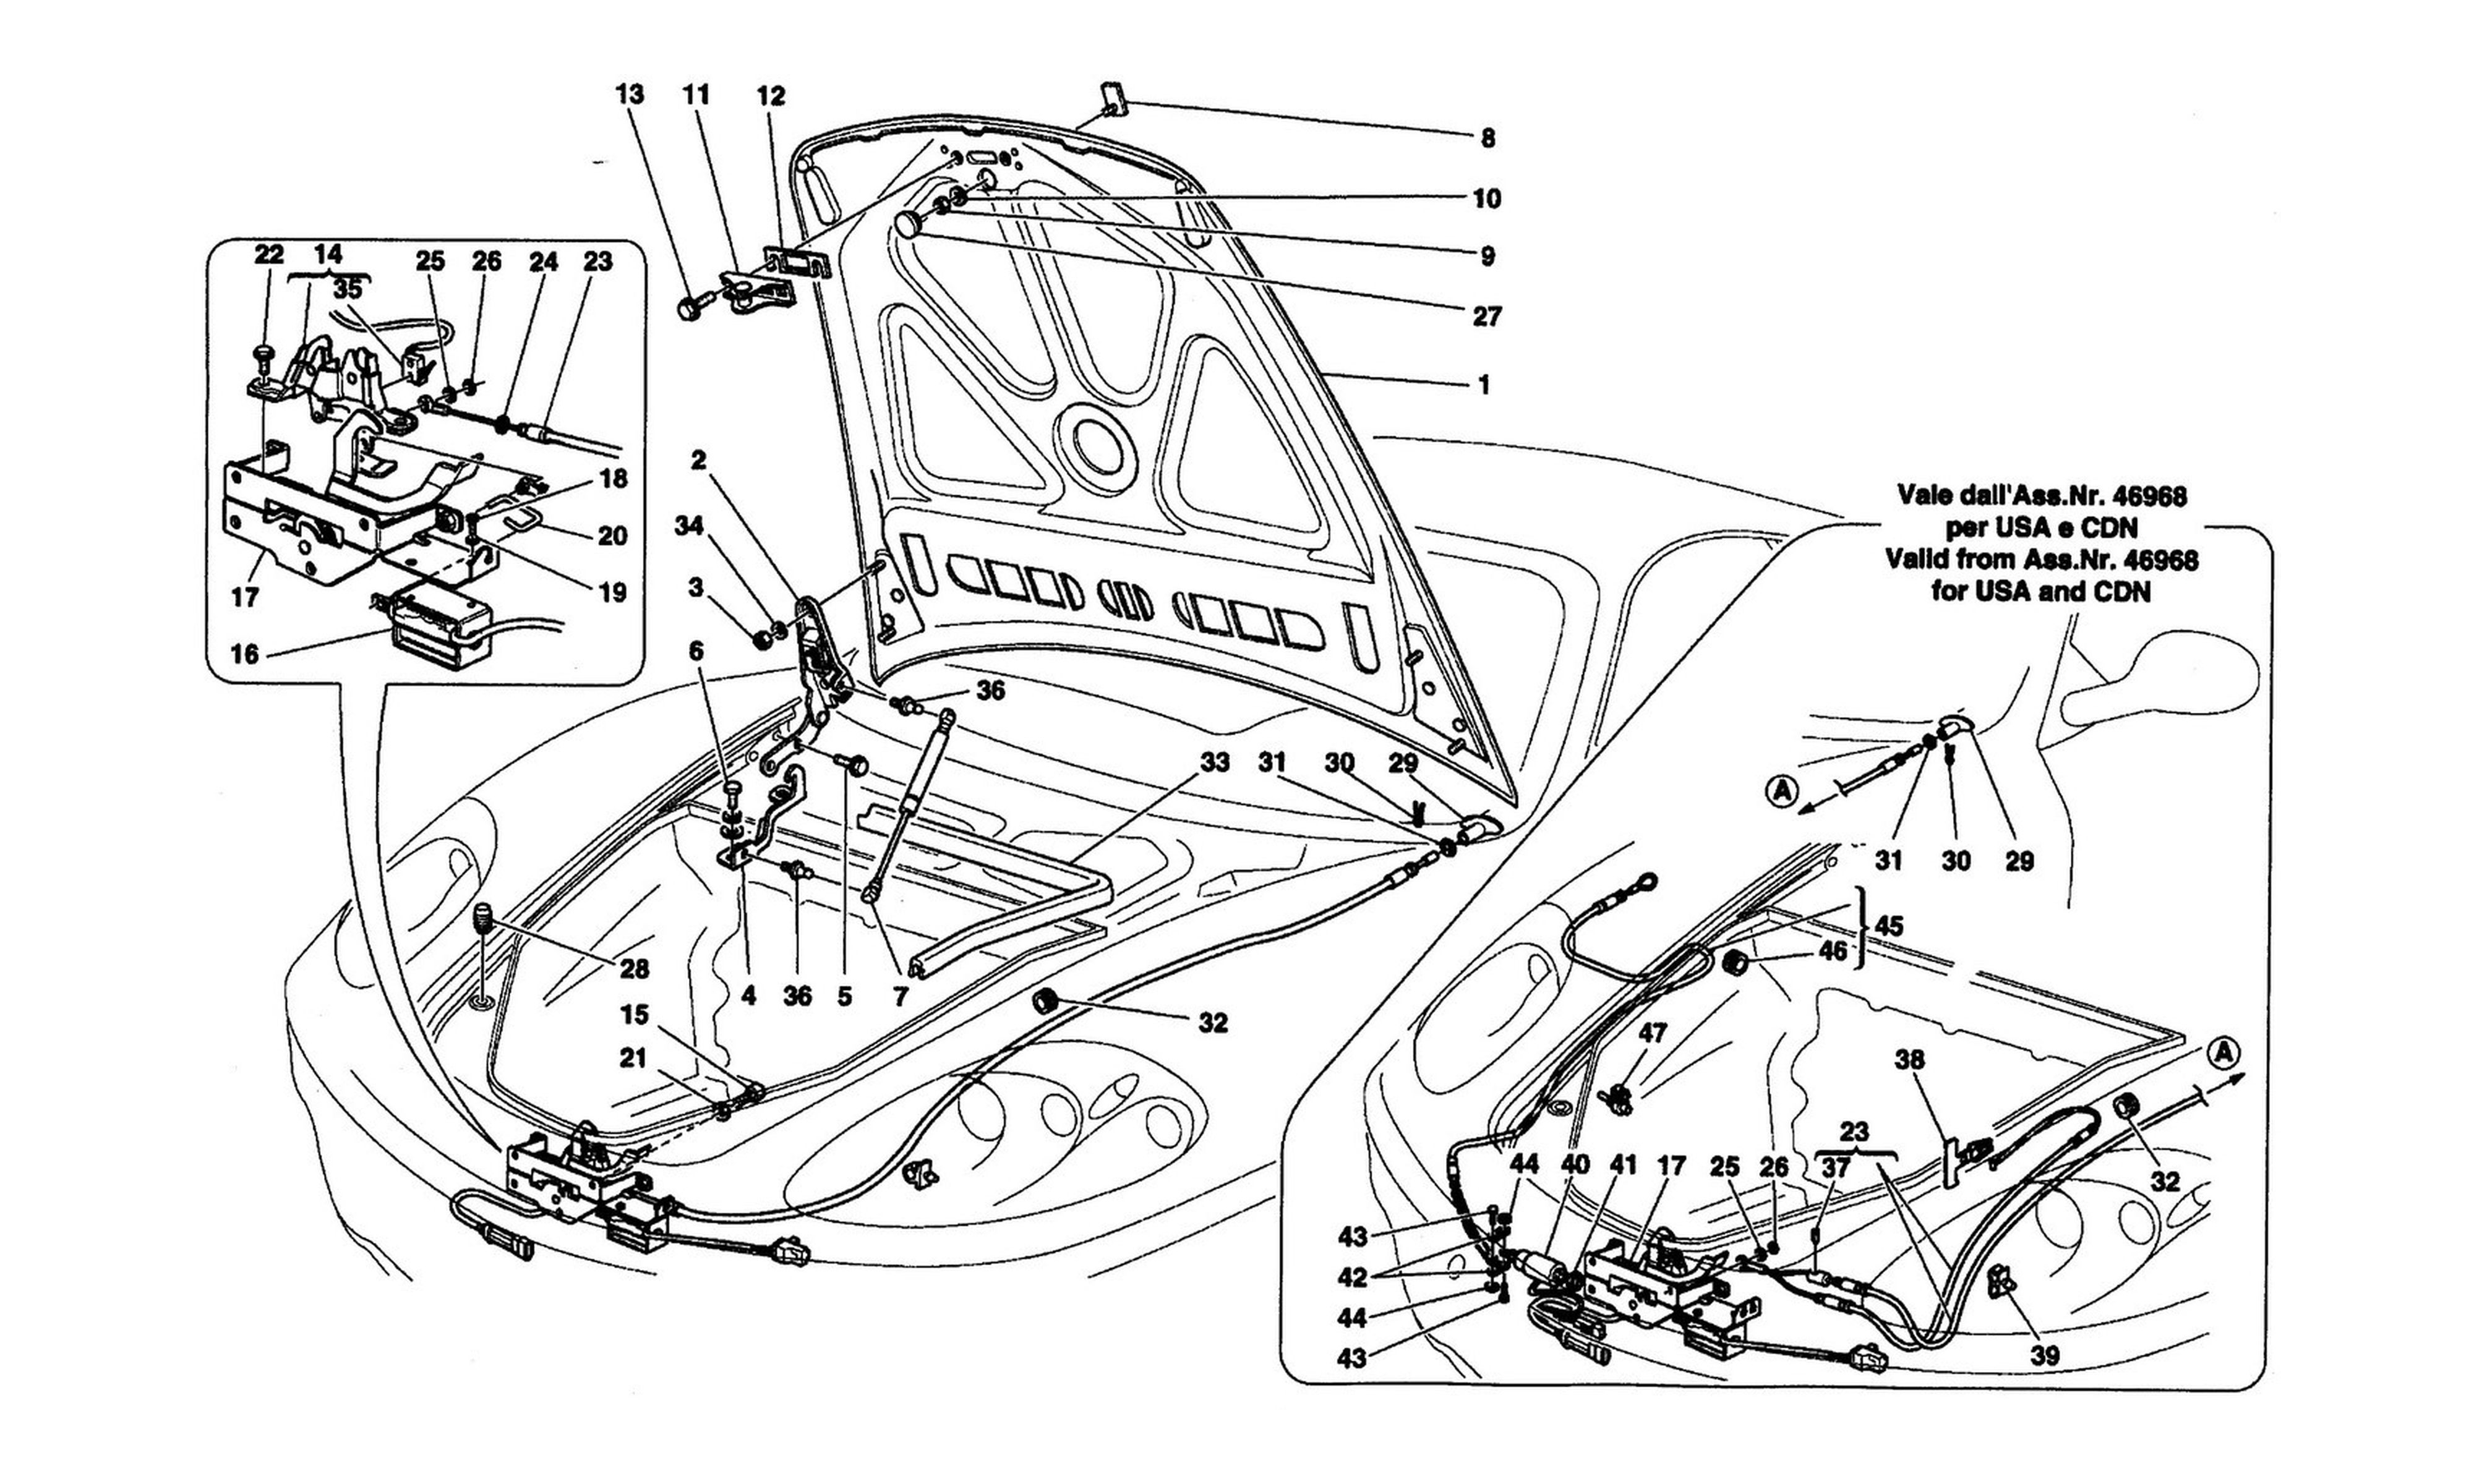 Schematic: Front Hood And Opening Device